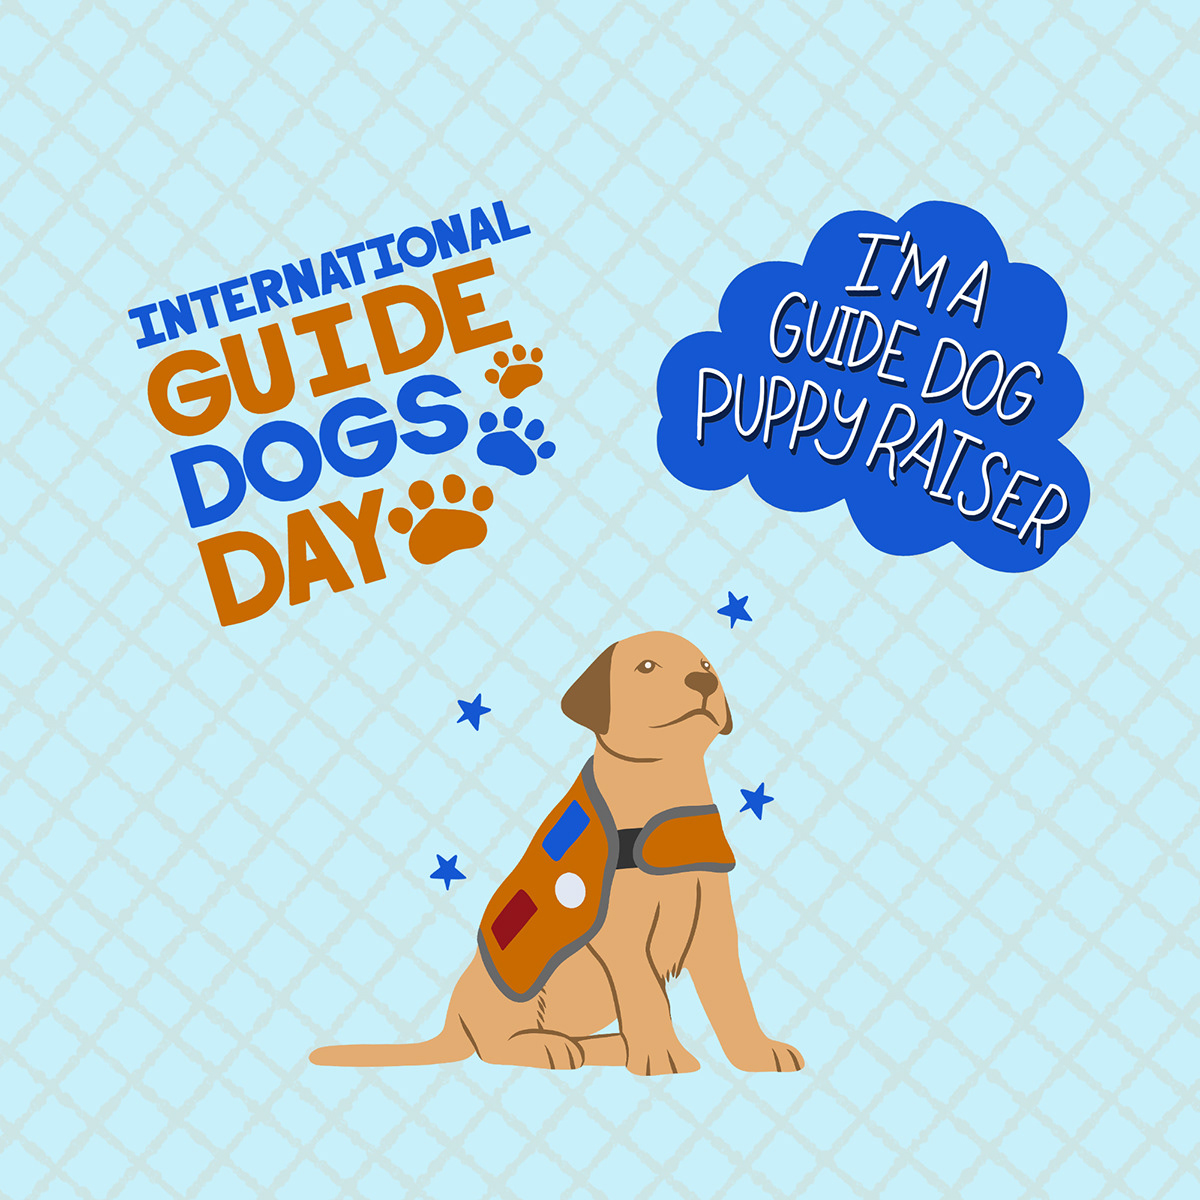 International Guide Dogs Day Instagram Stickers on Behance